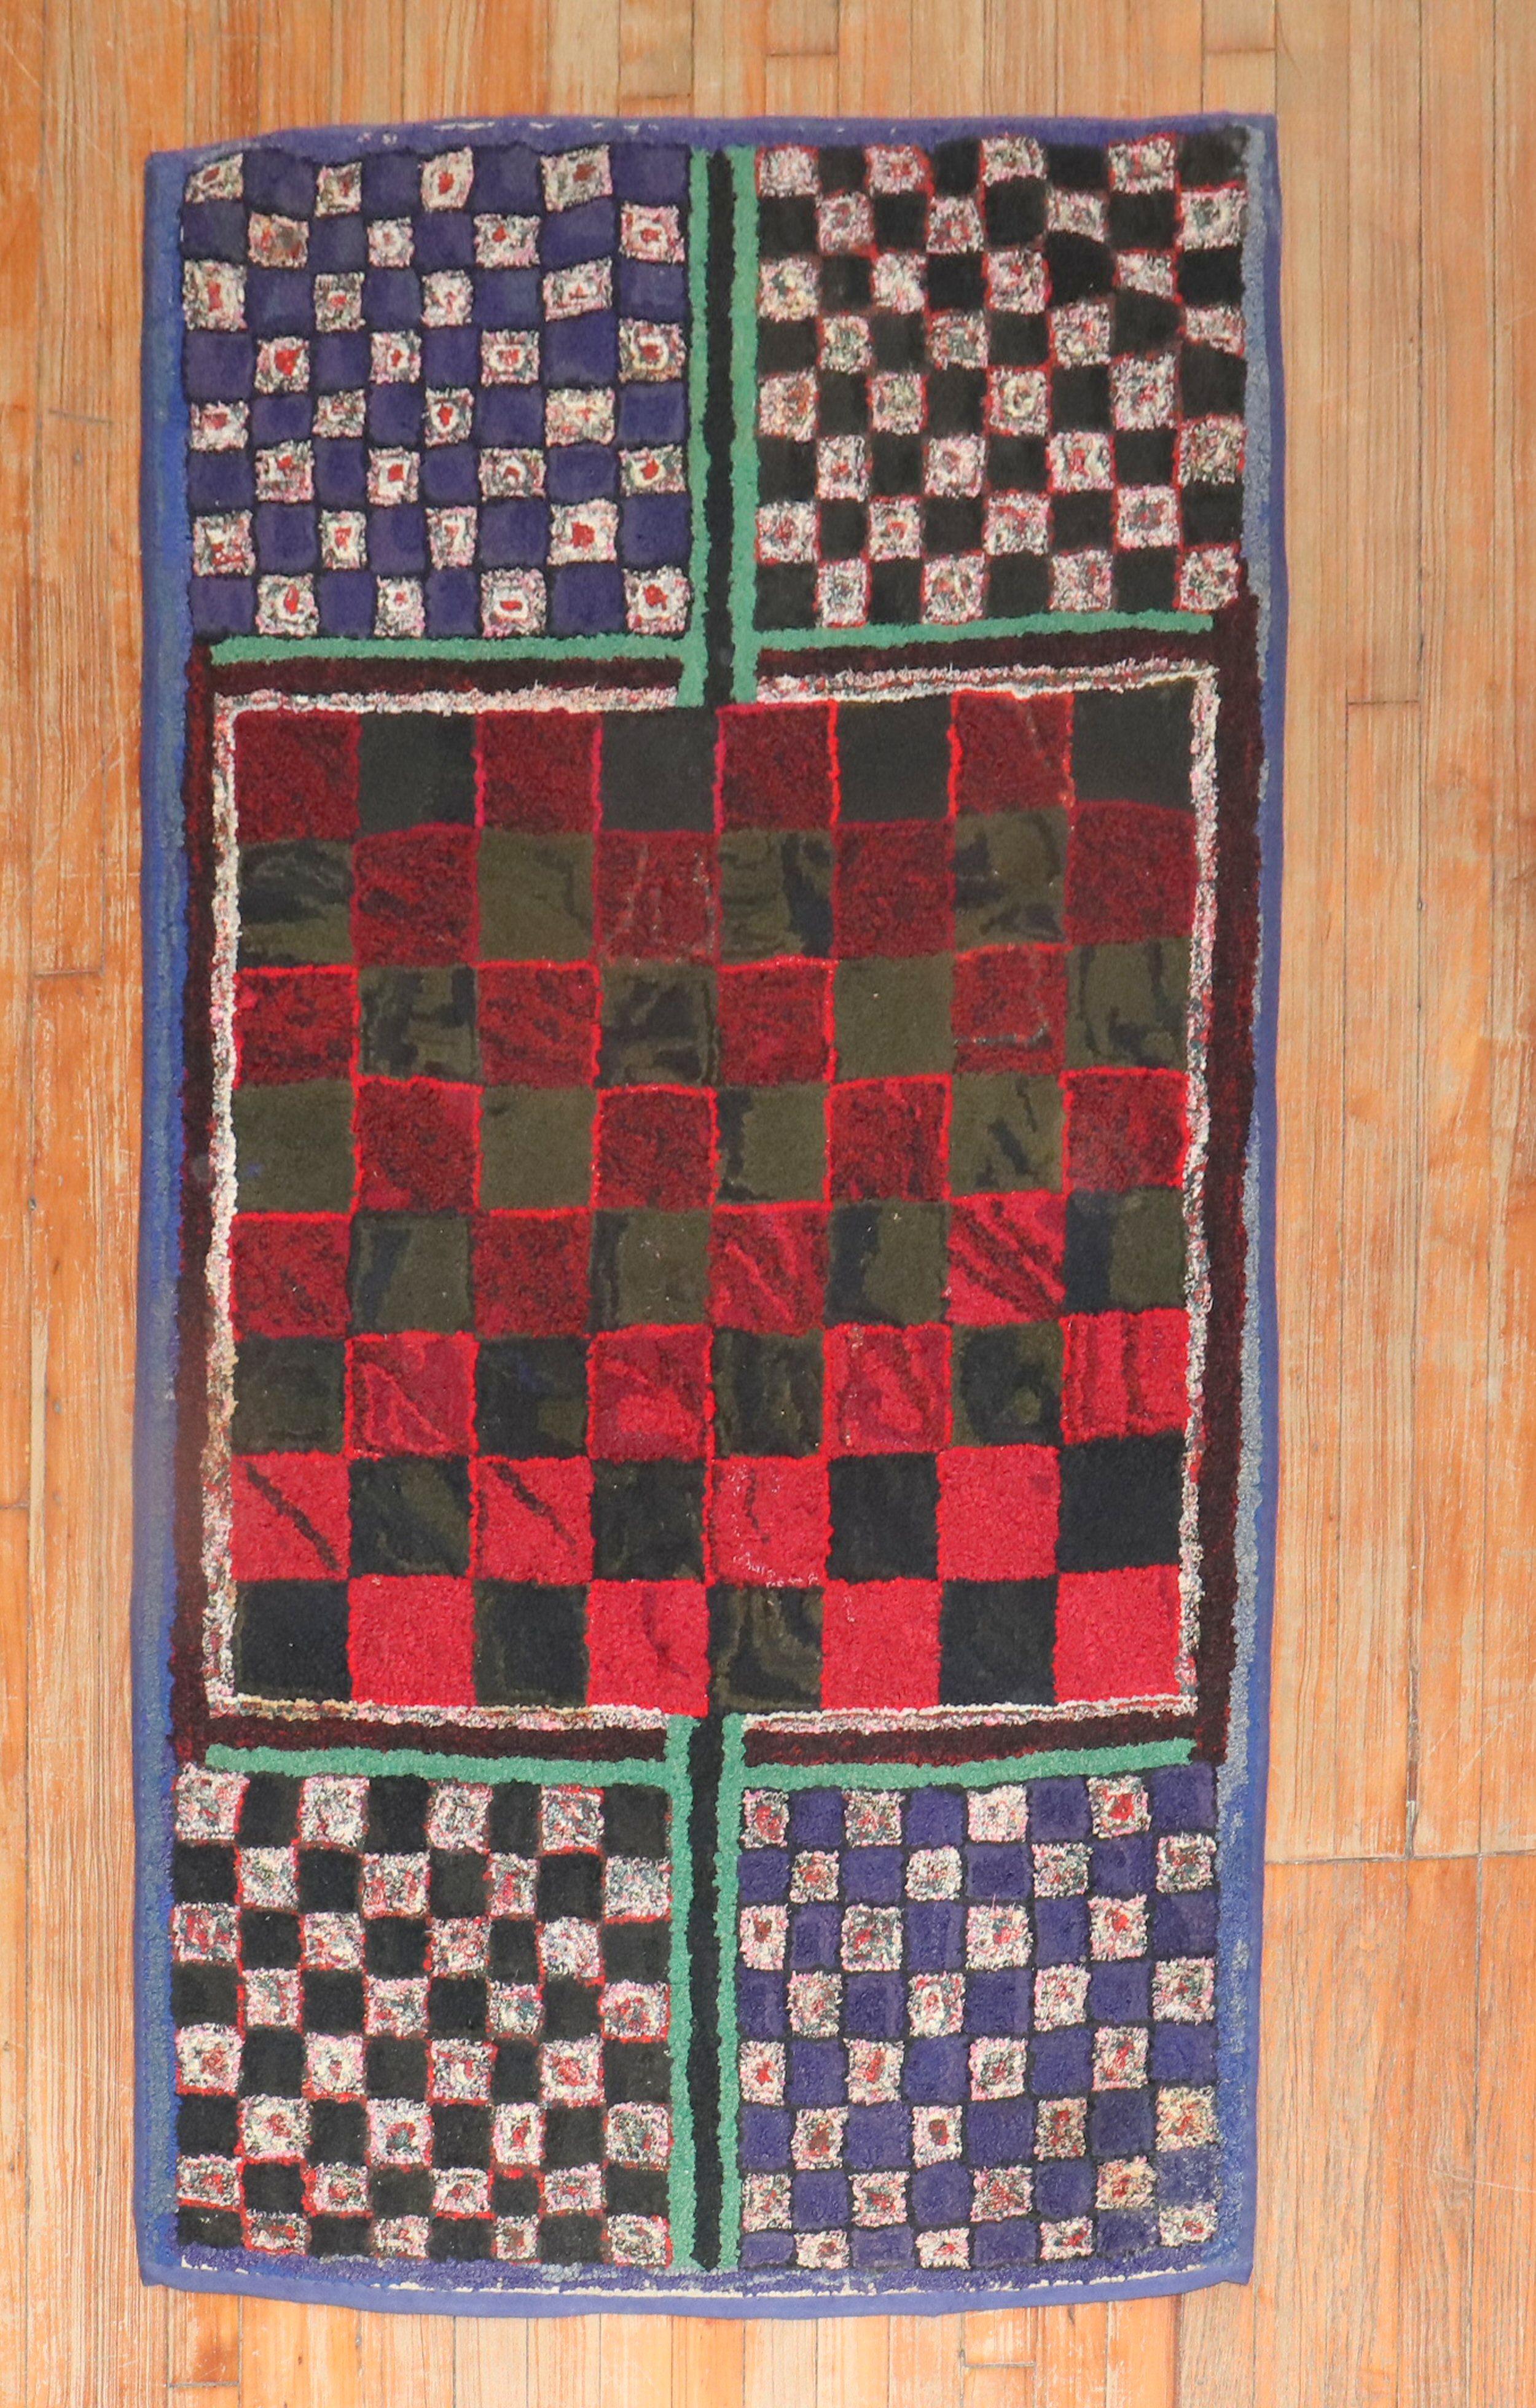 A handmade one of a kind American Hooked Rug from the 3rd quarter of the 20th century with an irregular checkerboard pattern

Measures: 3' x 5'7''.